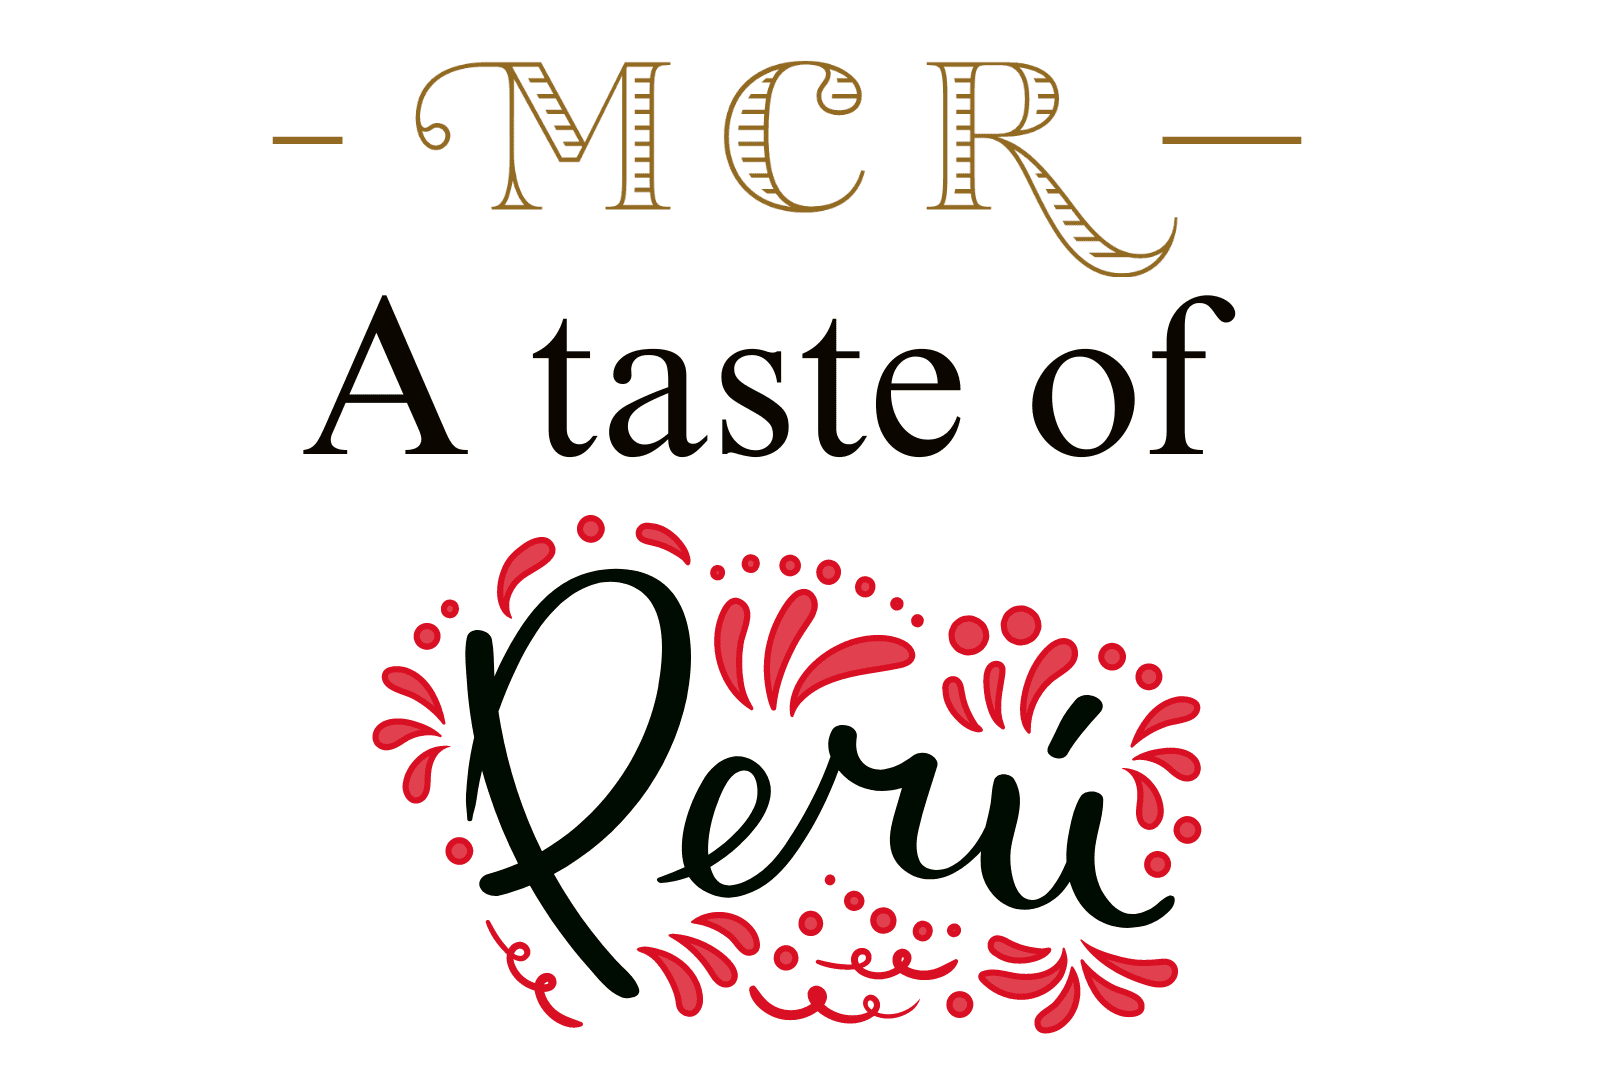 A poster displaying "MCR A taste of Peru" to promote a themed evening in the restaurant